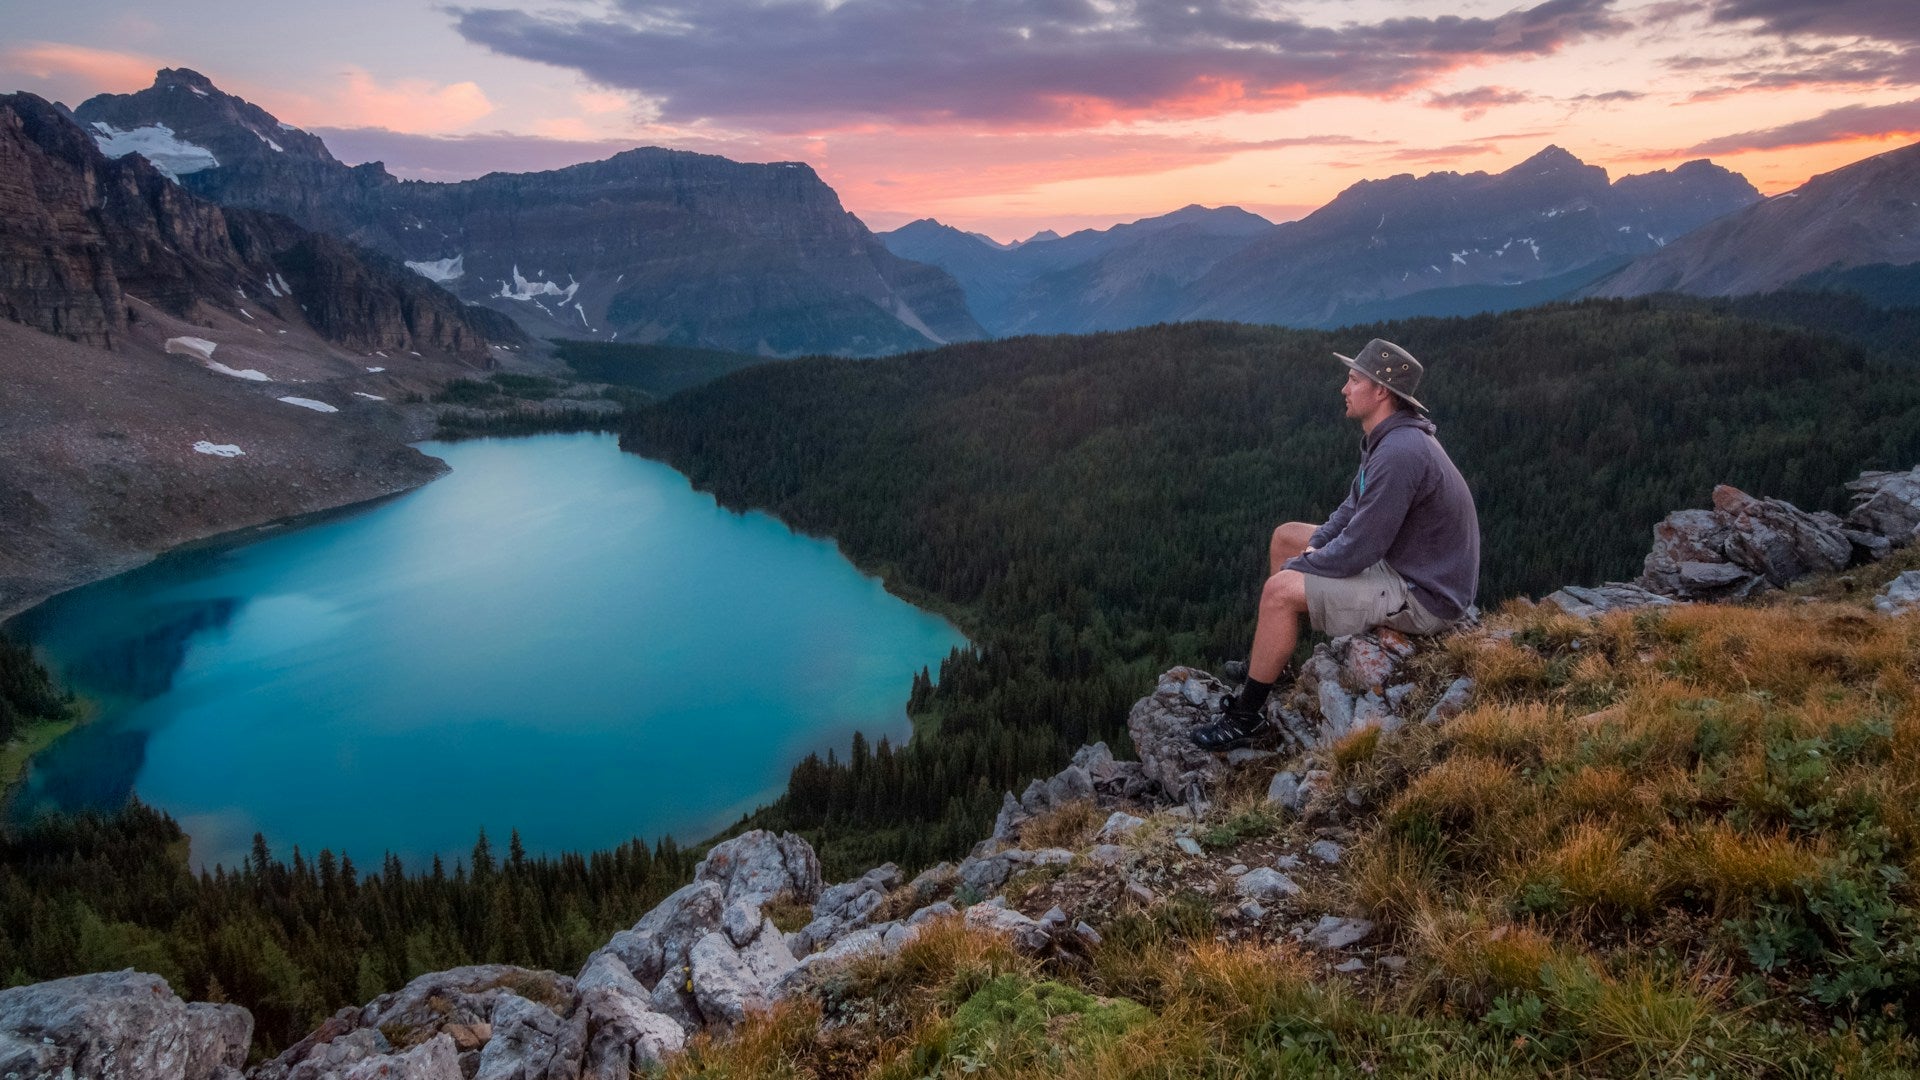 A man adopting responsible tourism practices in Canada